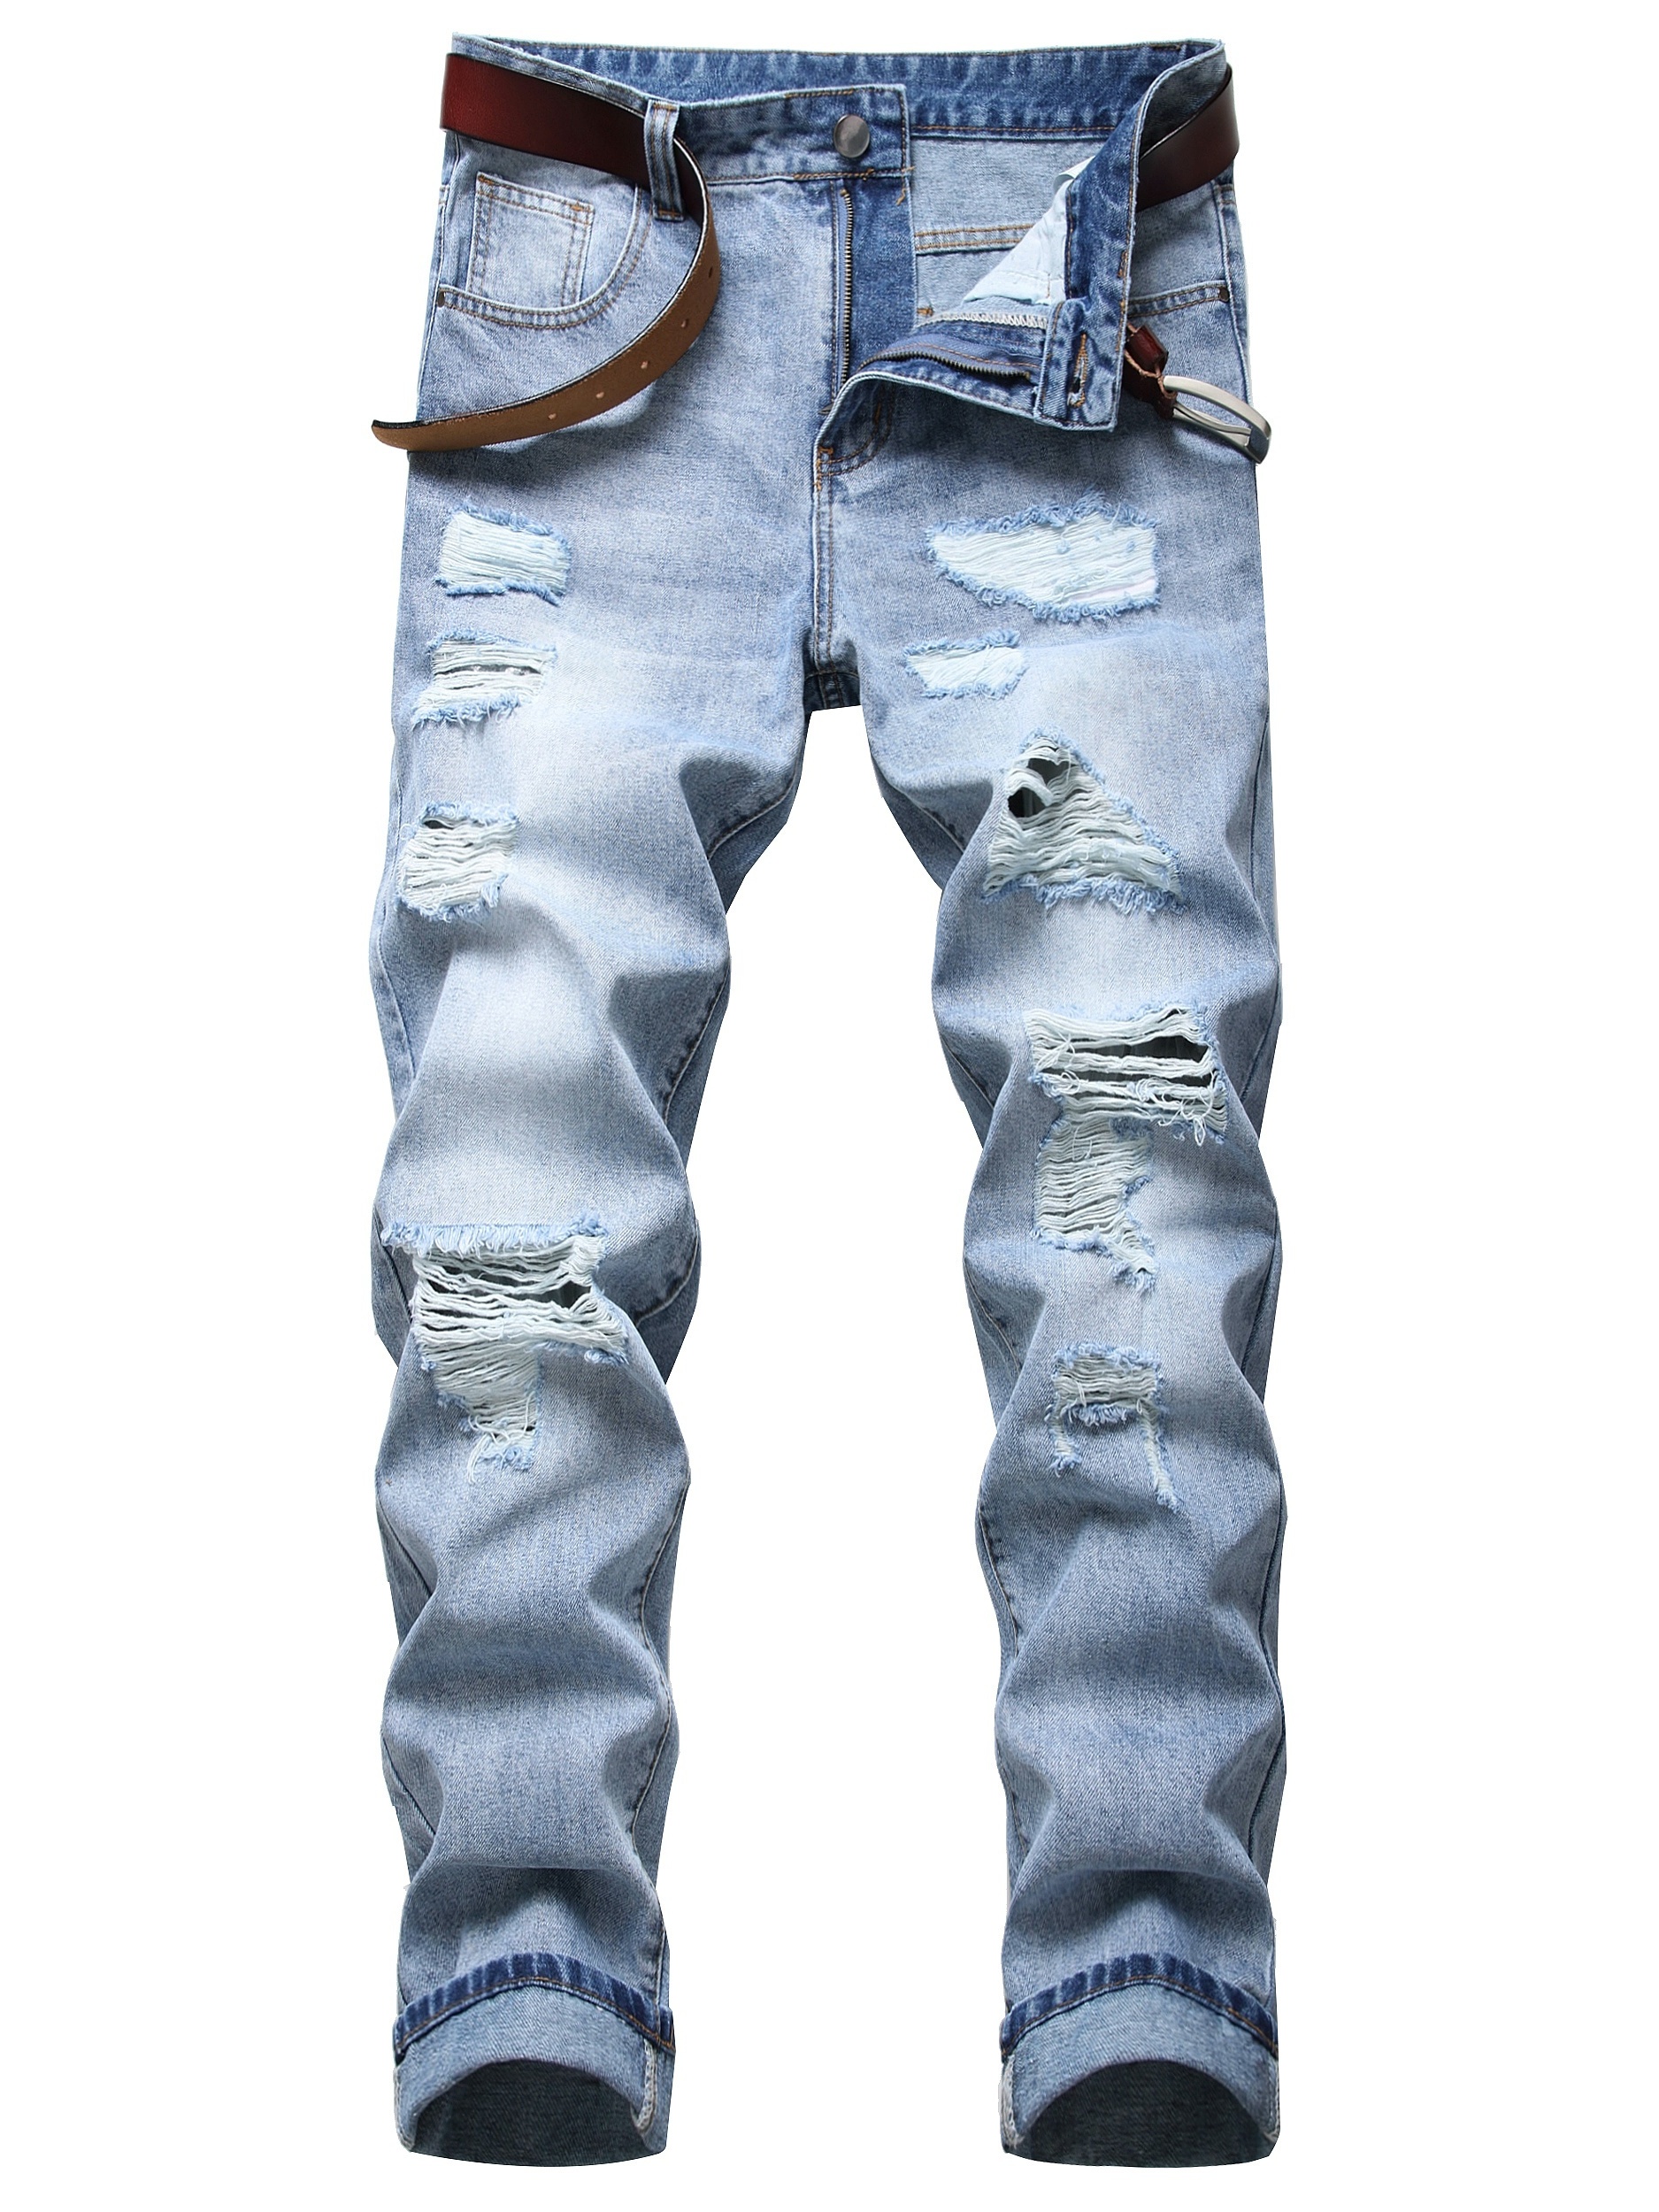 Men's Ripped Jeans, Ripped Skinny & Distressed Jeans